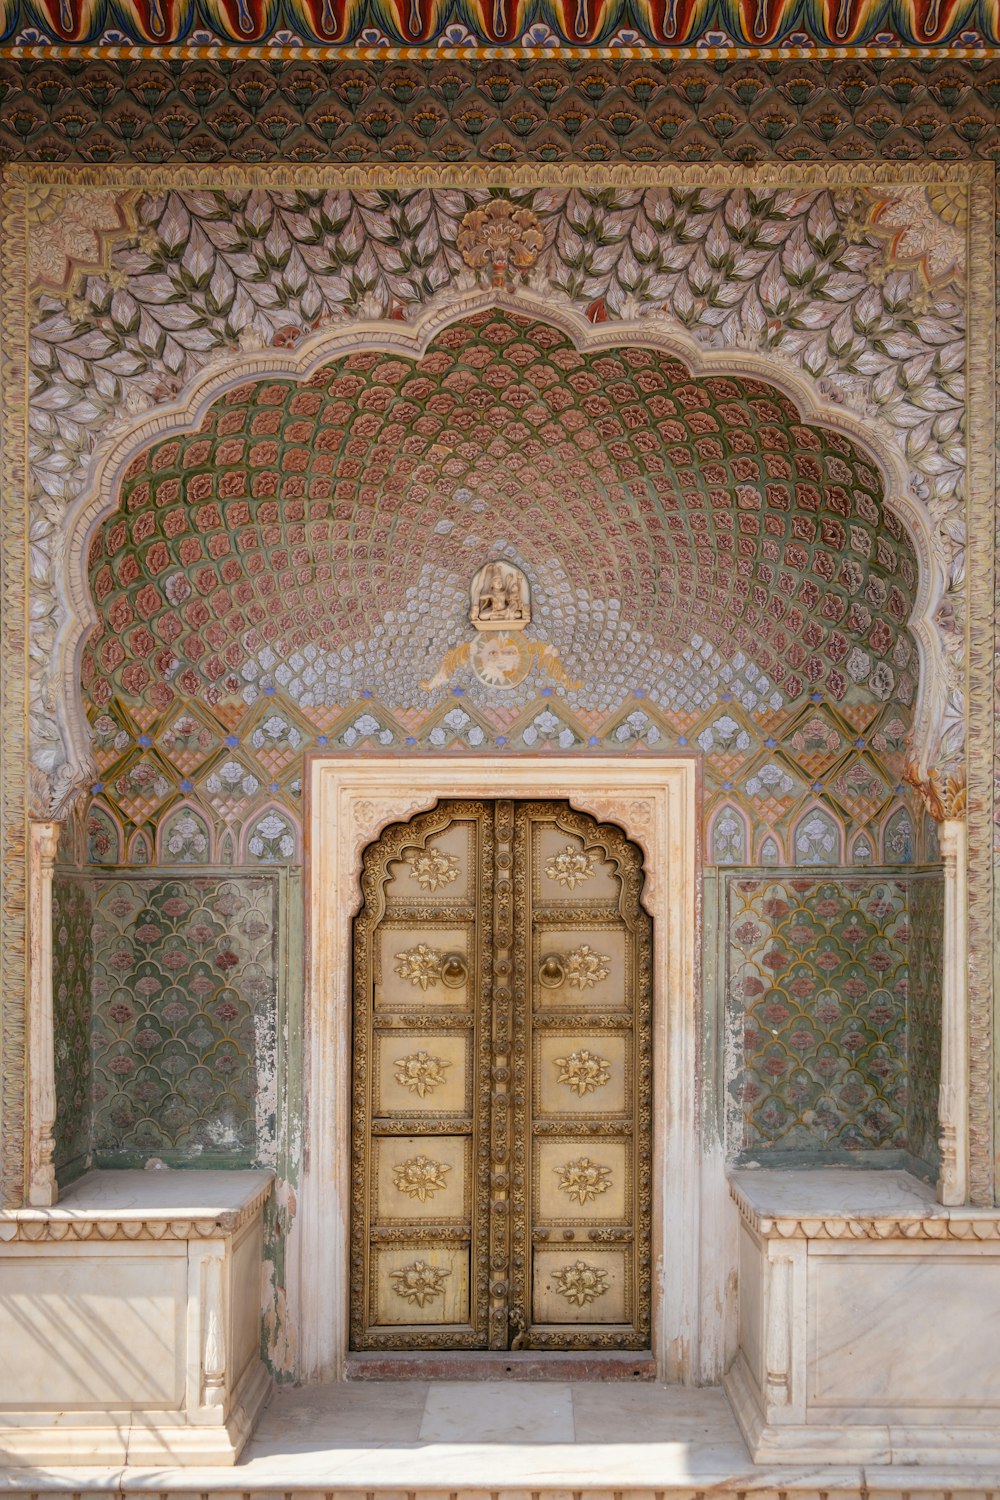 a large ornate doorway with a gold door